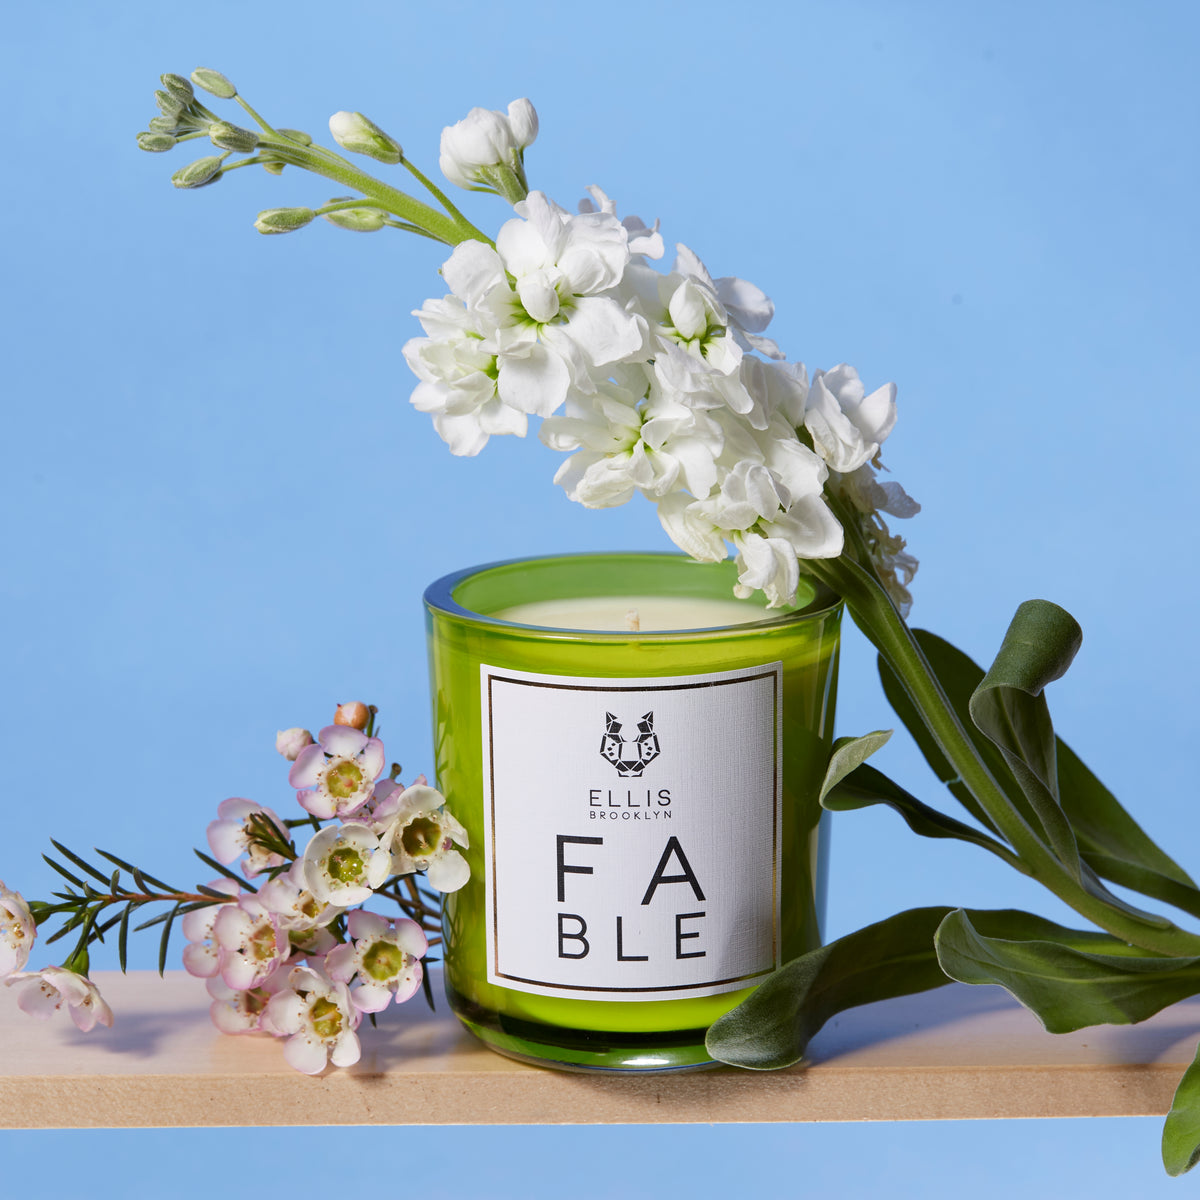 FABLE candle near flowers